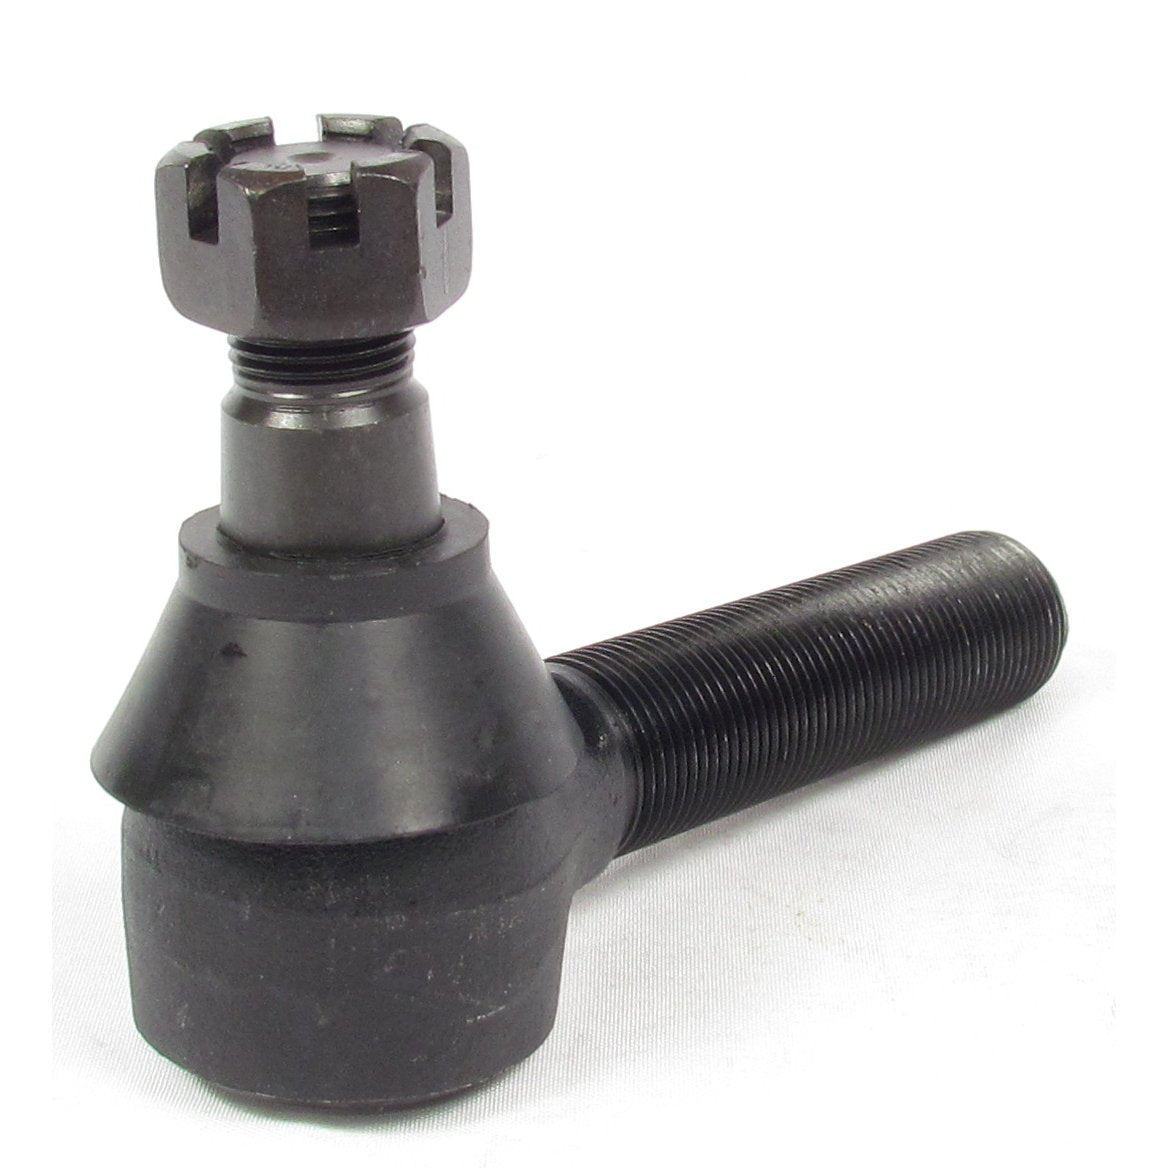 Fortpro Tie Rod End Compatible with Mack, International Replaces R230068 - Left Side | F265858